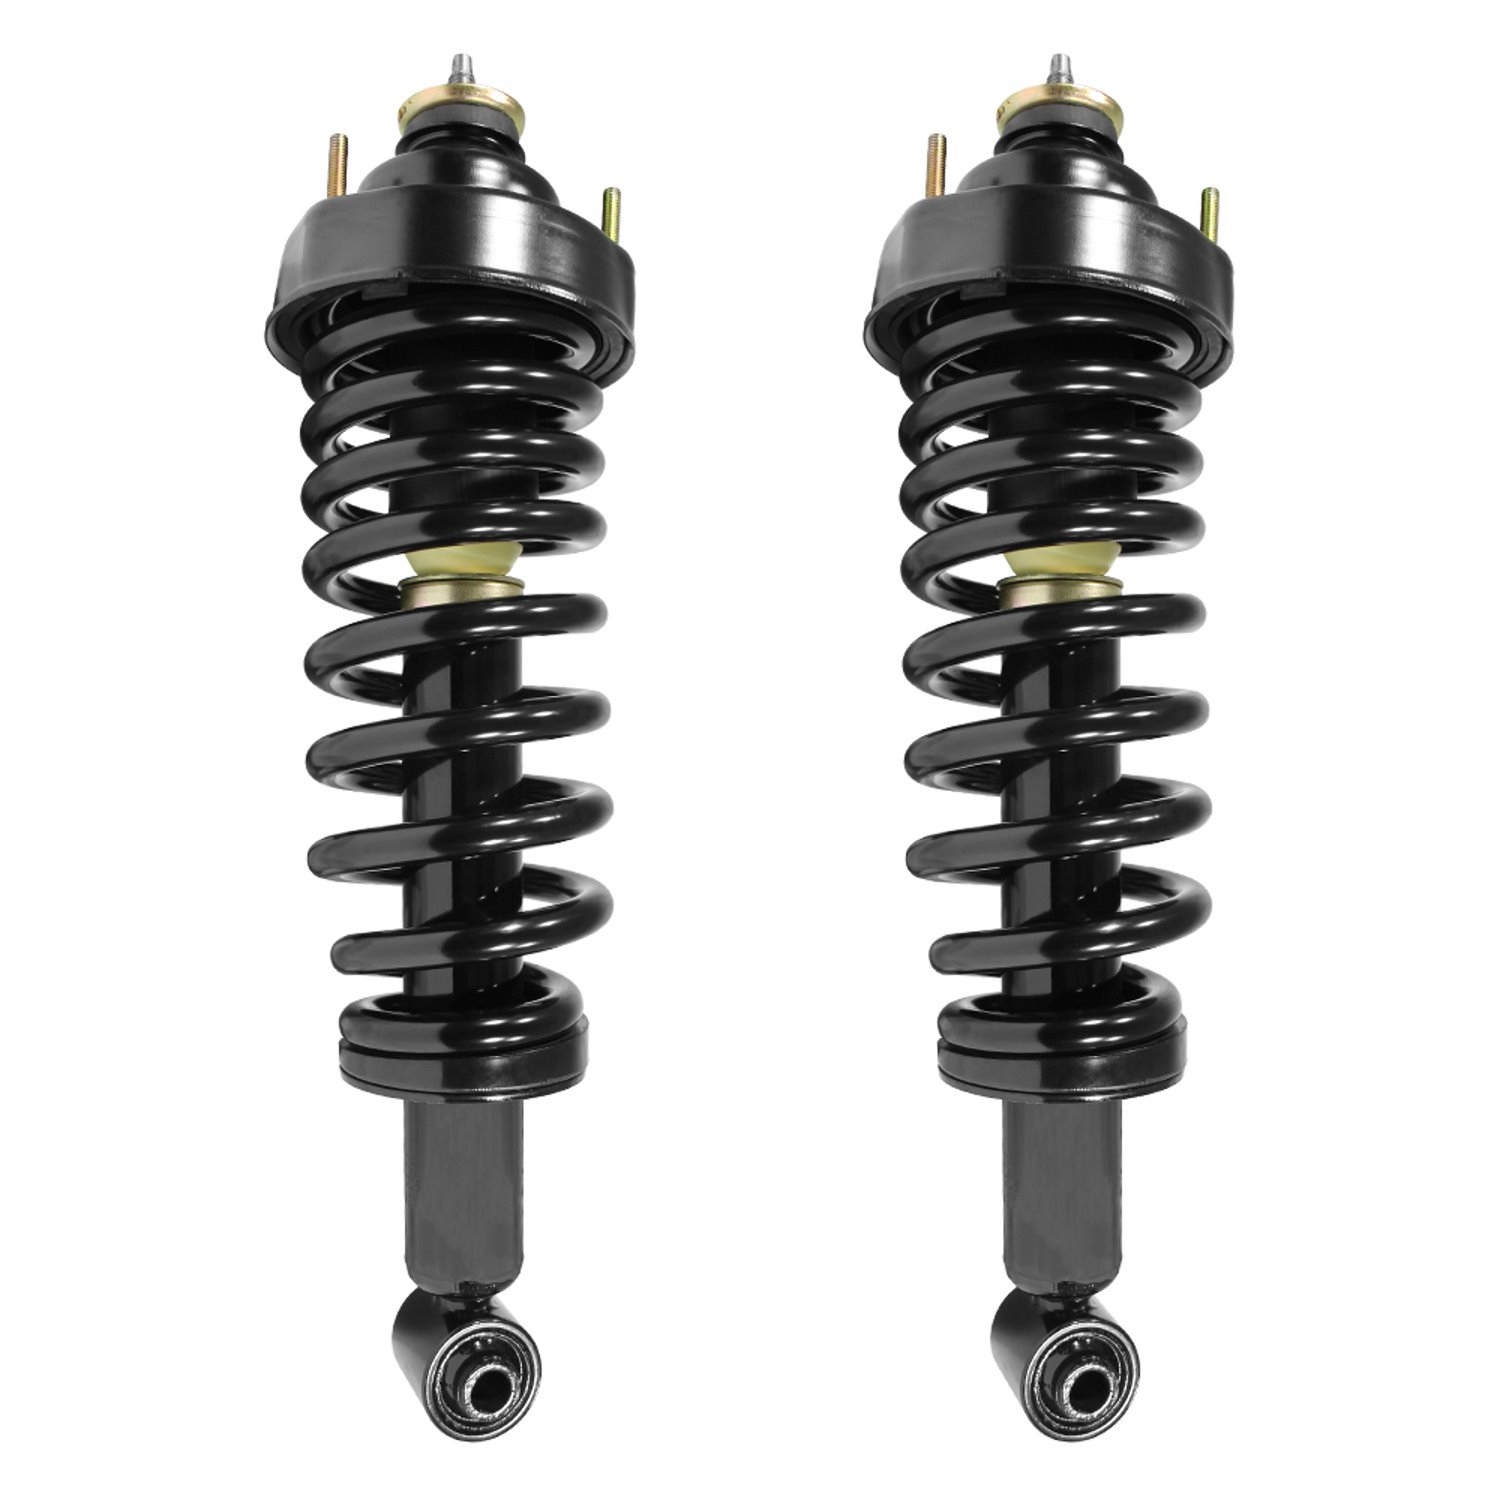 2-15060-001 Suspension Strut & Coil Spring Assembly Set Fits Select Ford Explorer, Mercury Mountaineer